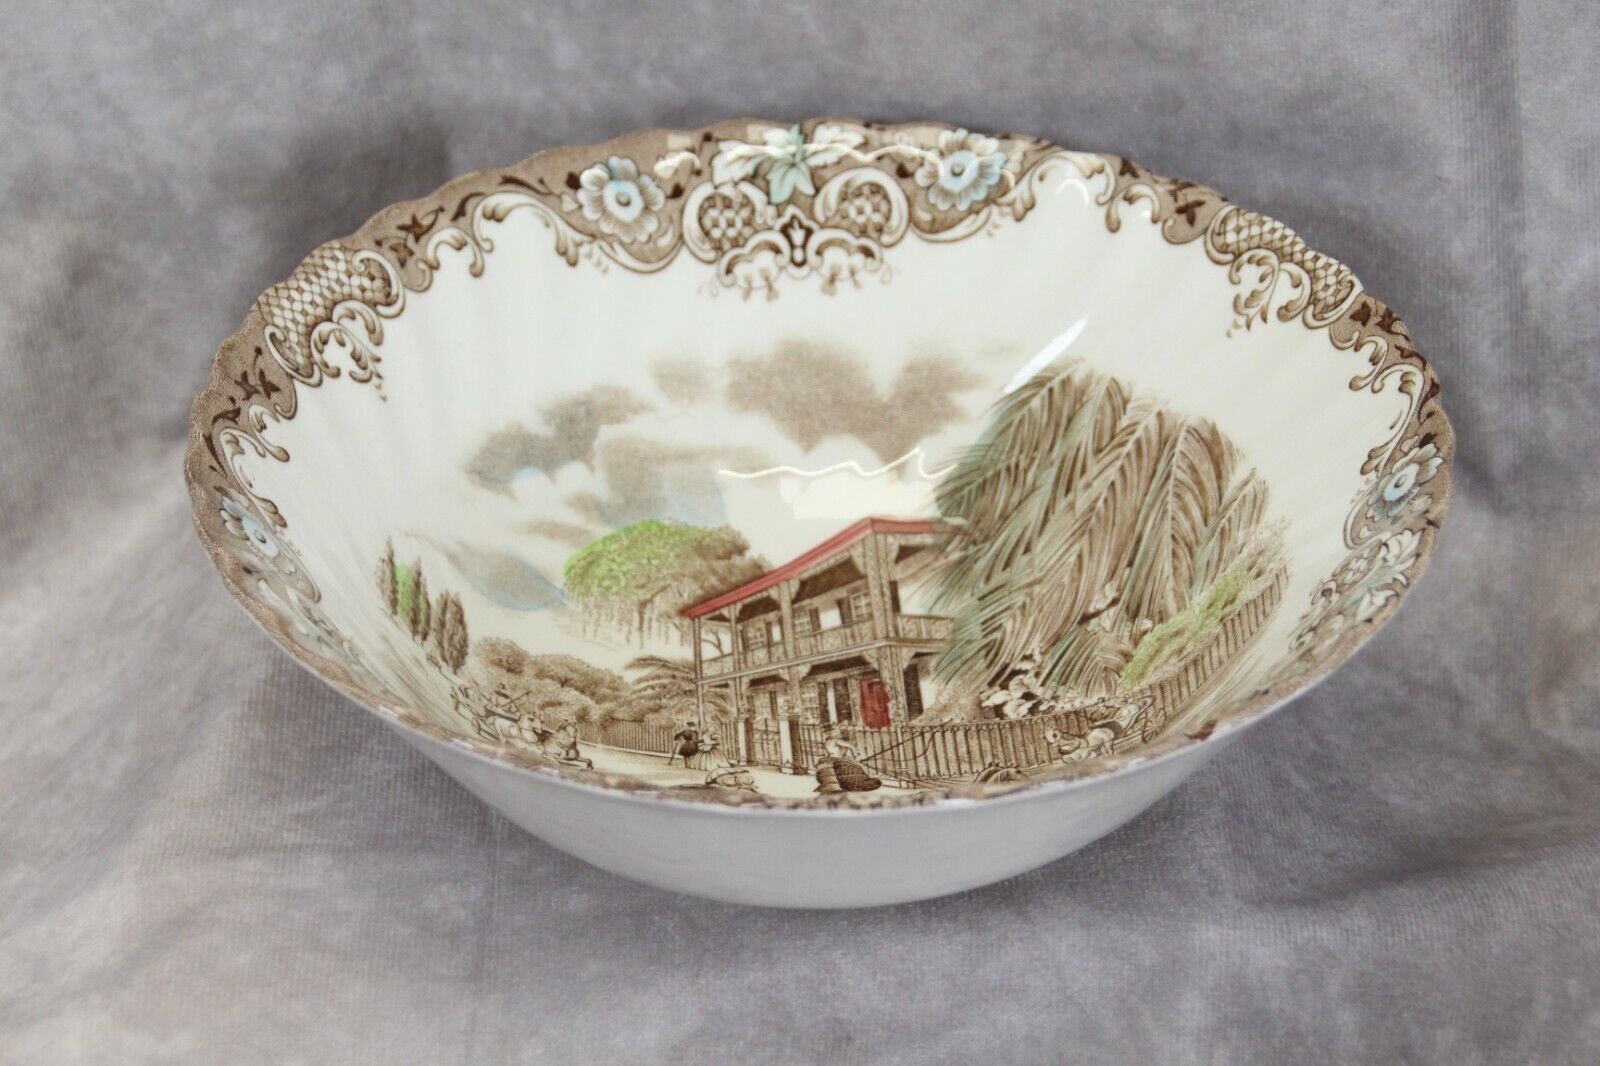 Primary image for Johnson Brothers Heritage Hall Round Vegetable Bowl 8.25" 